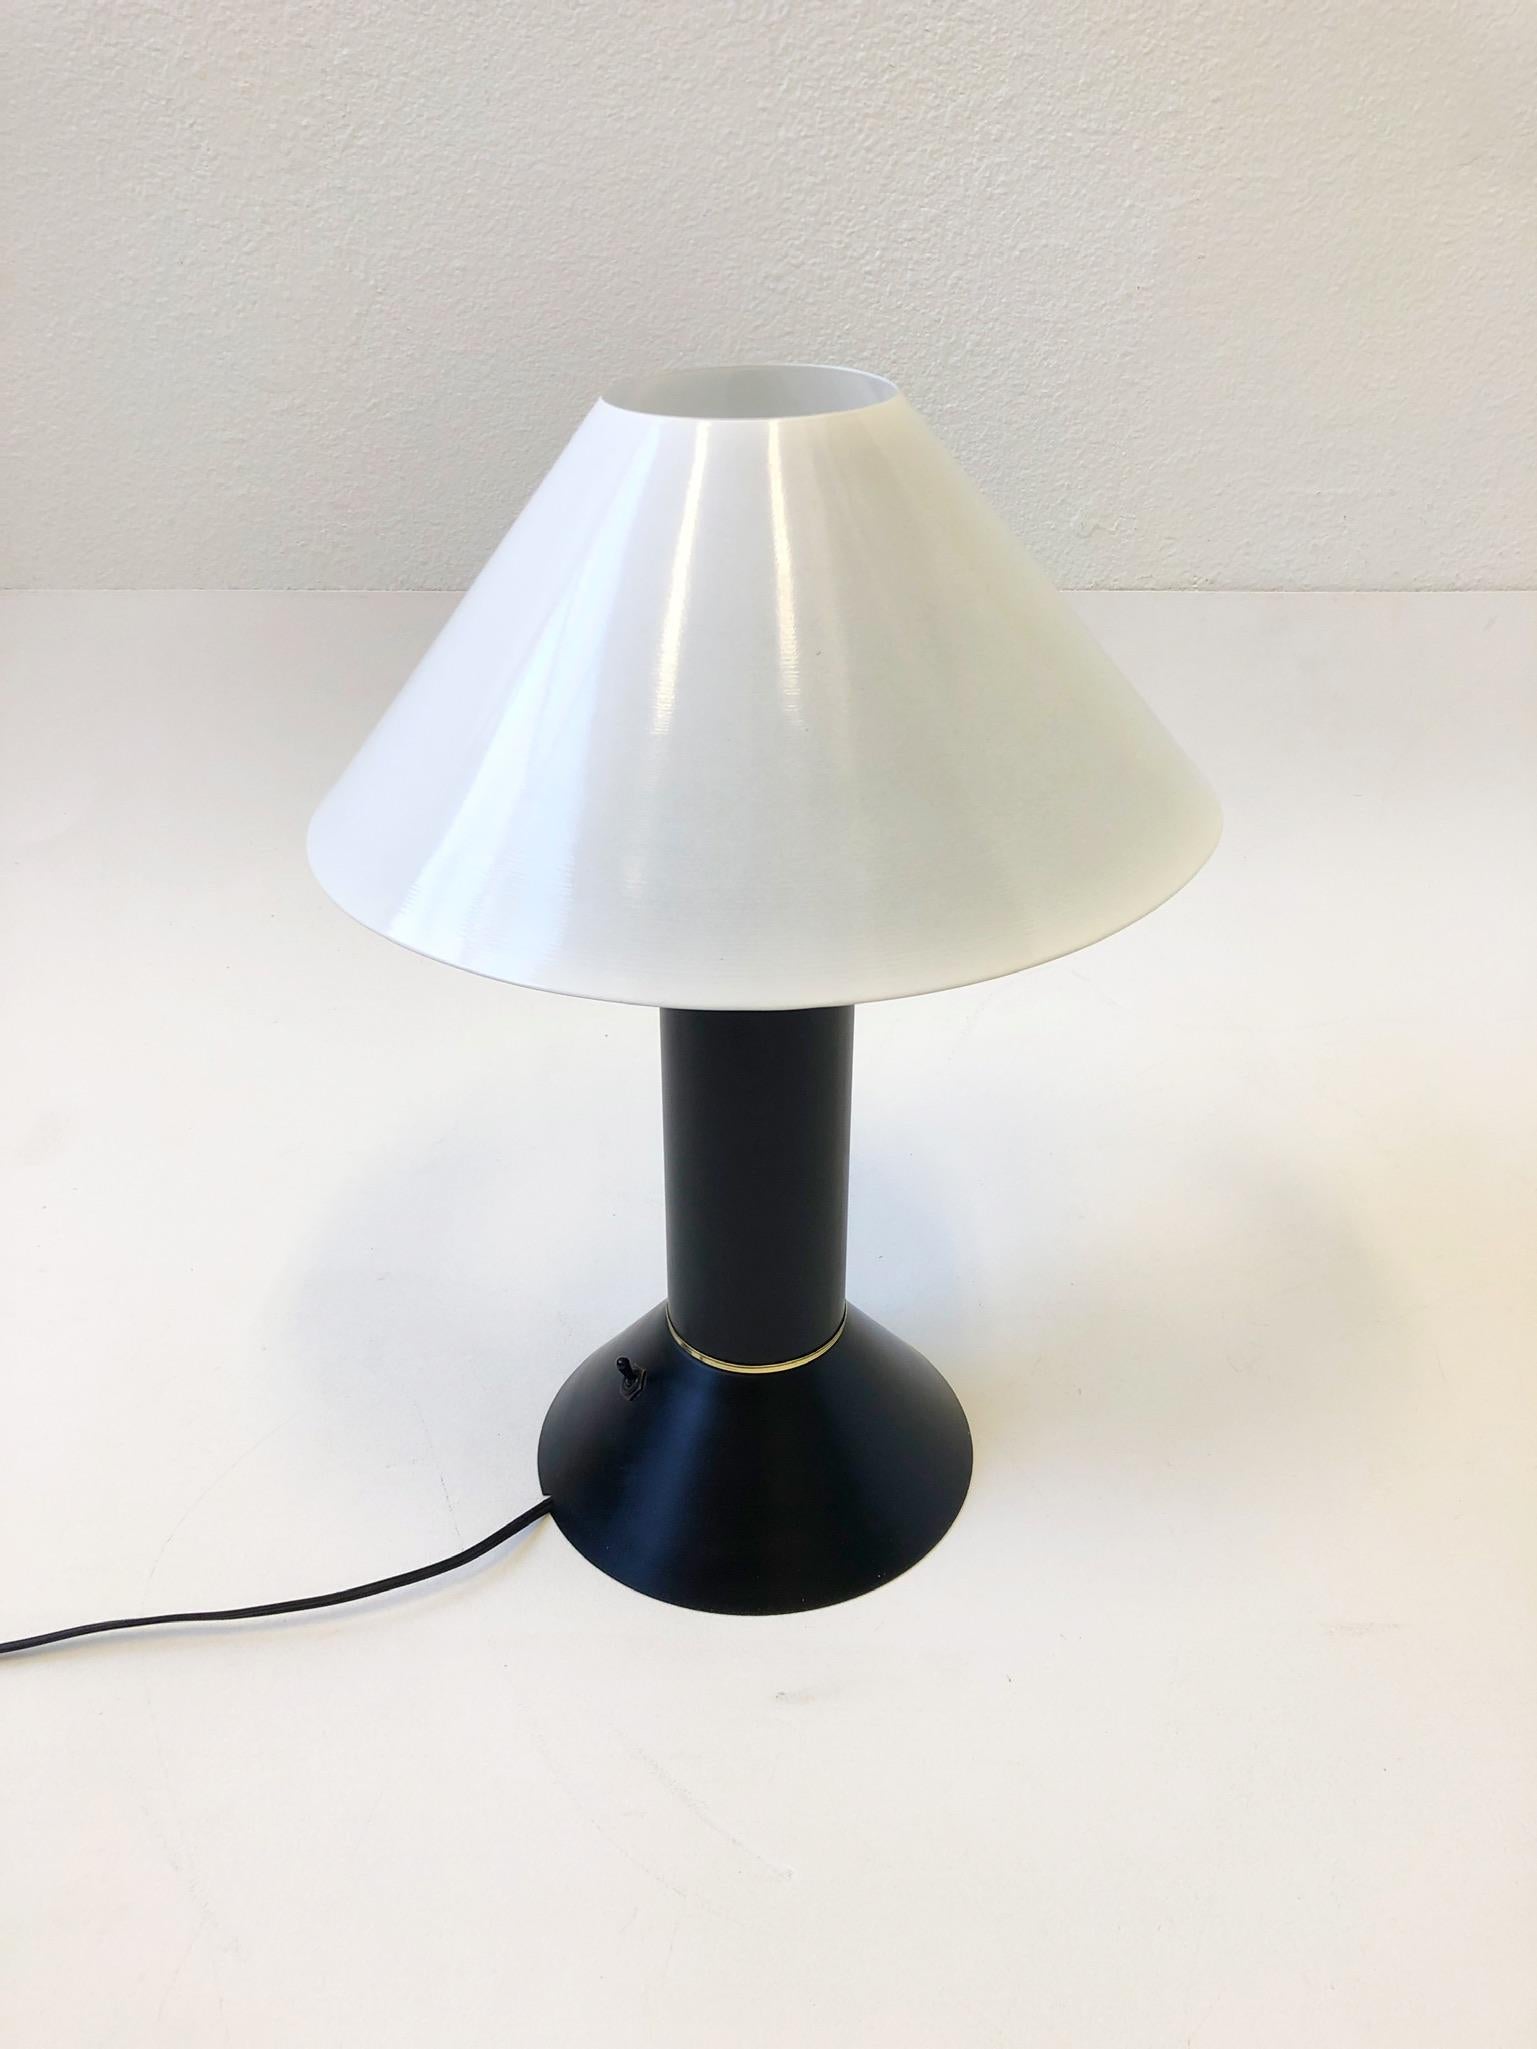 American Black and White with Brass Details Table Lamp by Ron Rezek For Sale